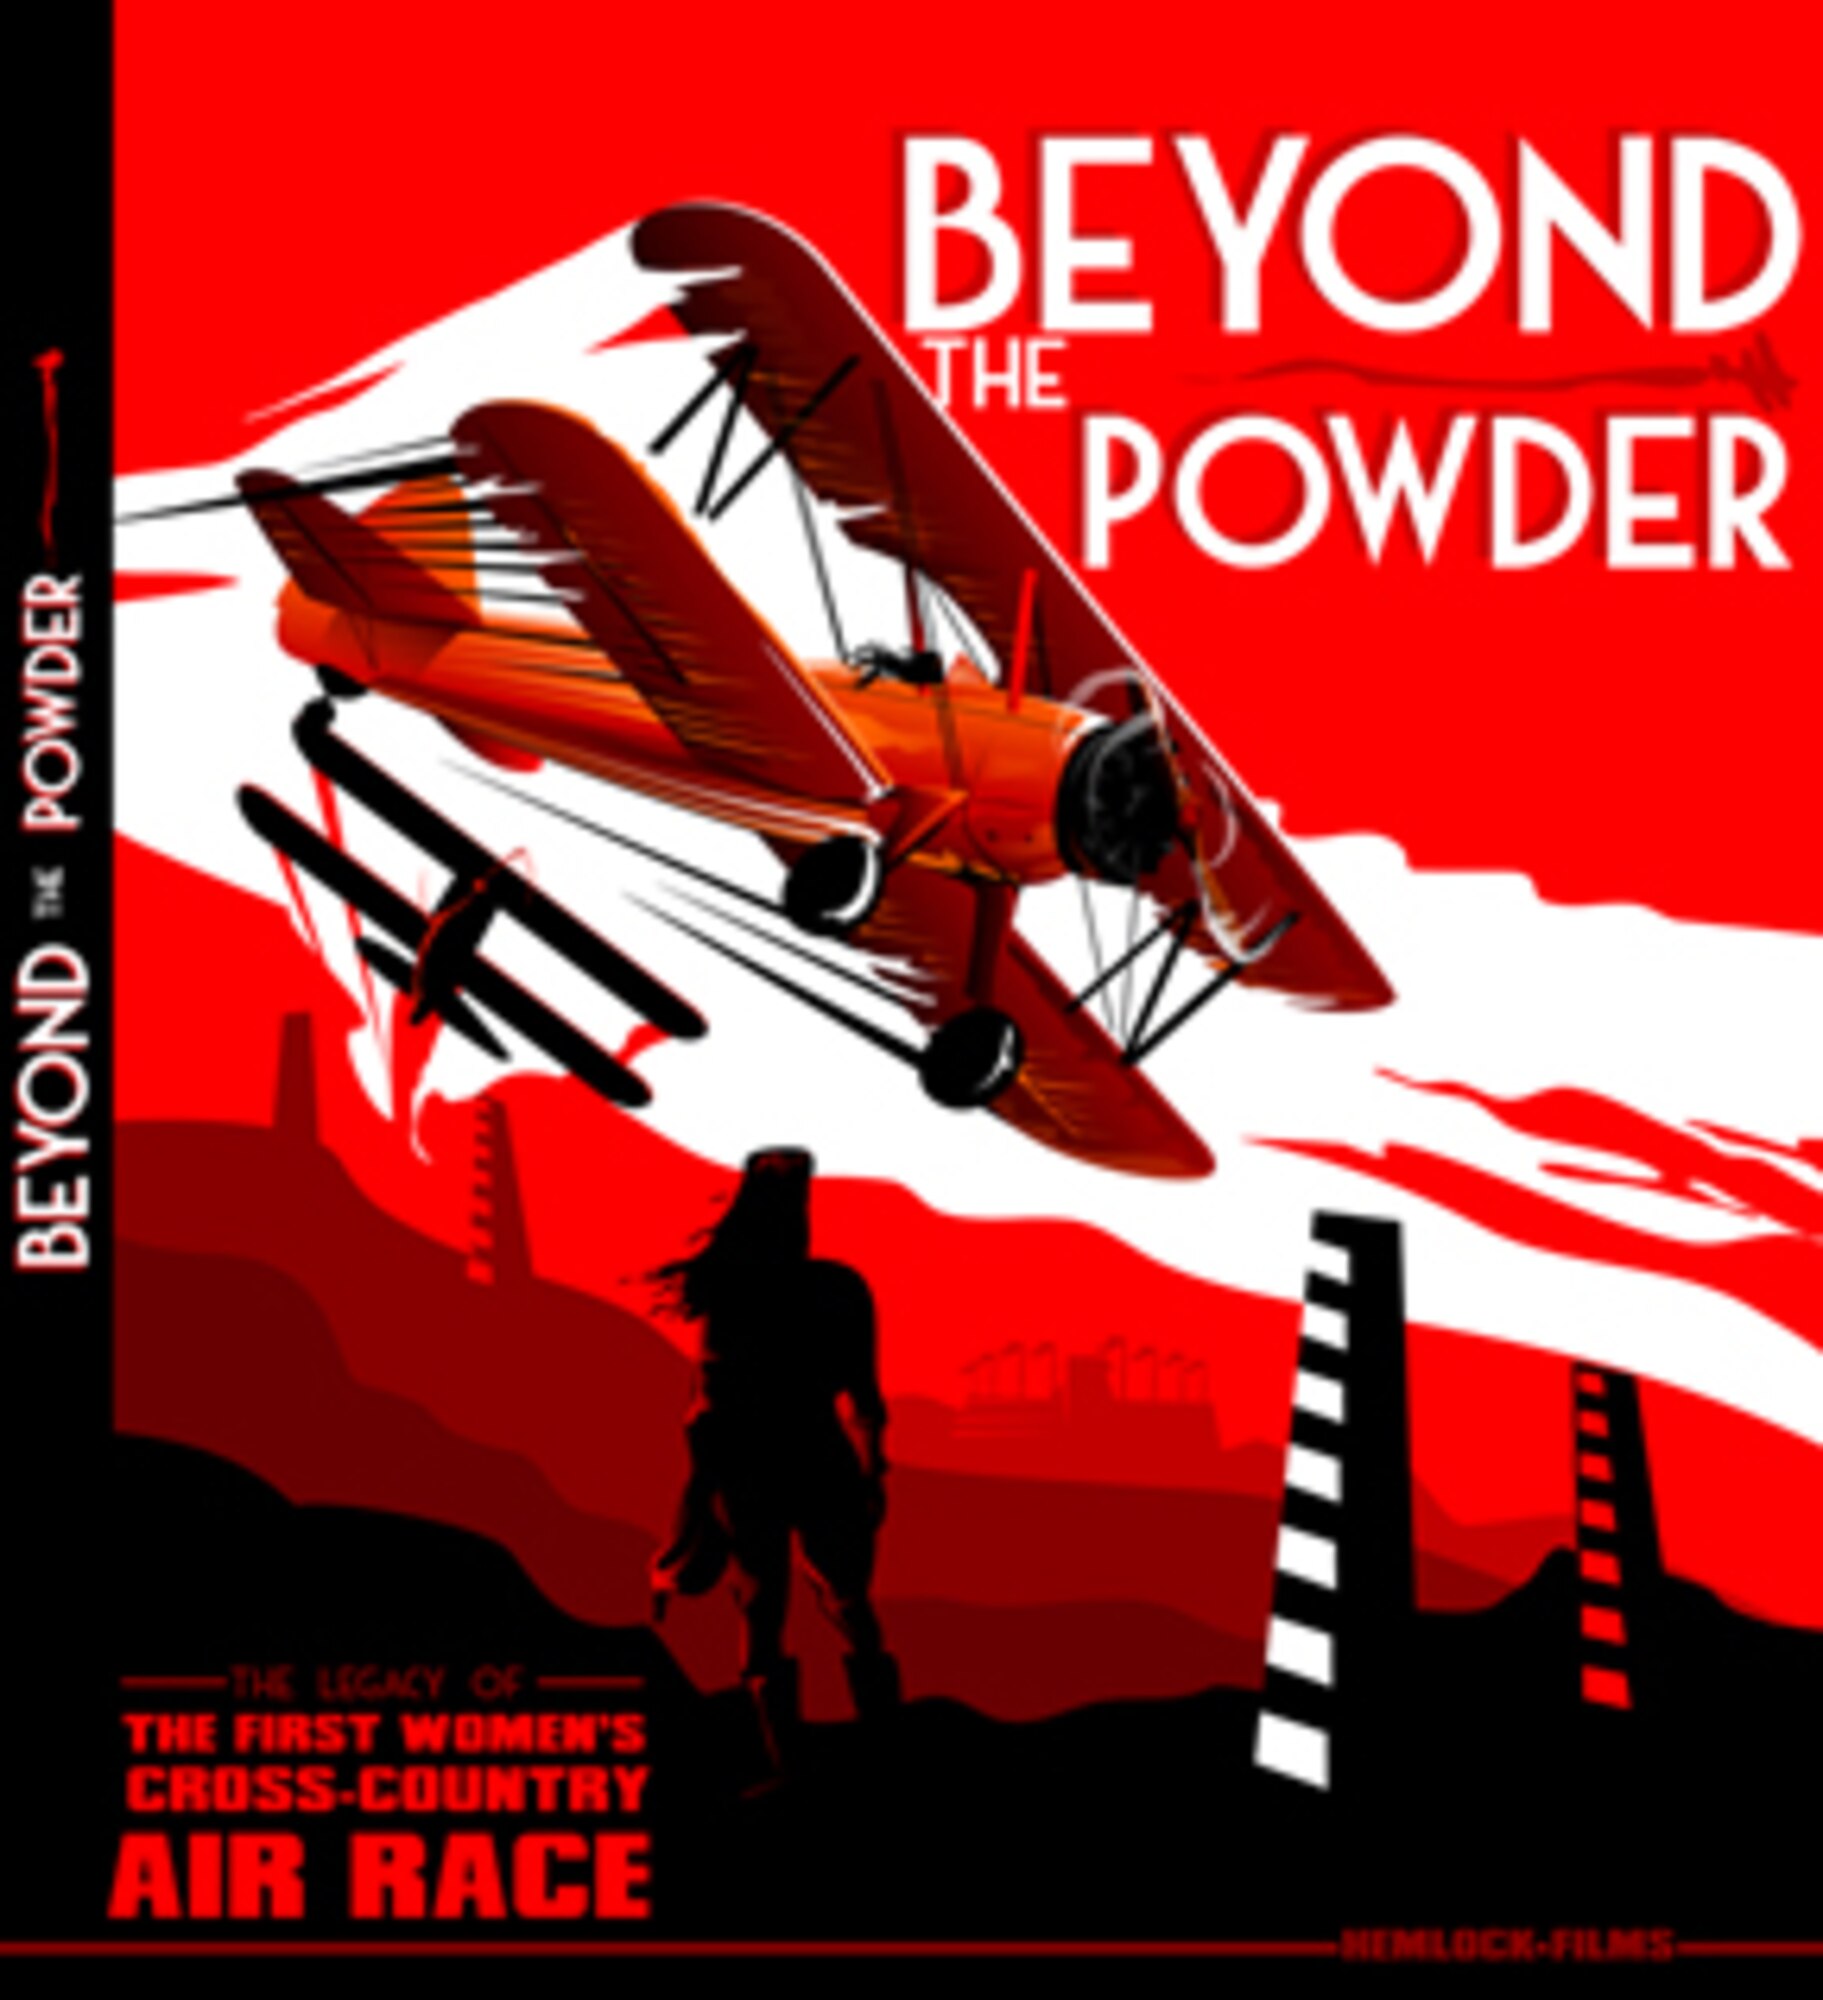 The Air Force Museum Theatre’s 2016 Living History Film Series continues on March 12, 2016, with a showing of "Beyond the Powder: The Legacy of the First Women’s Cross-Country Air Race" at 4 p.m. in celebration of Women's History Month.